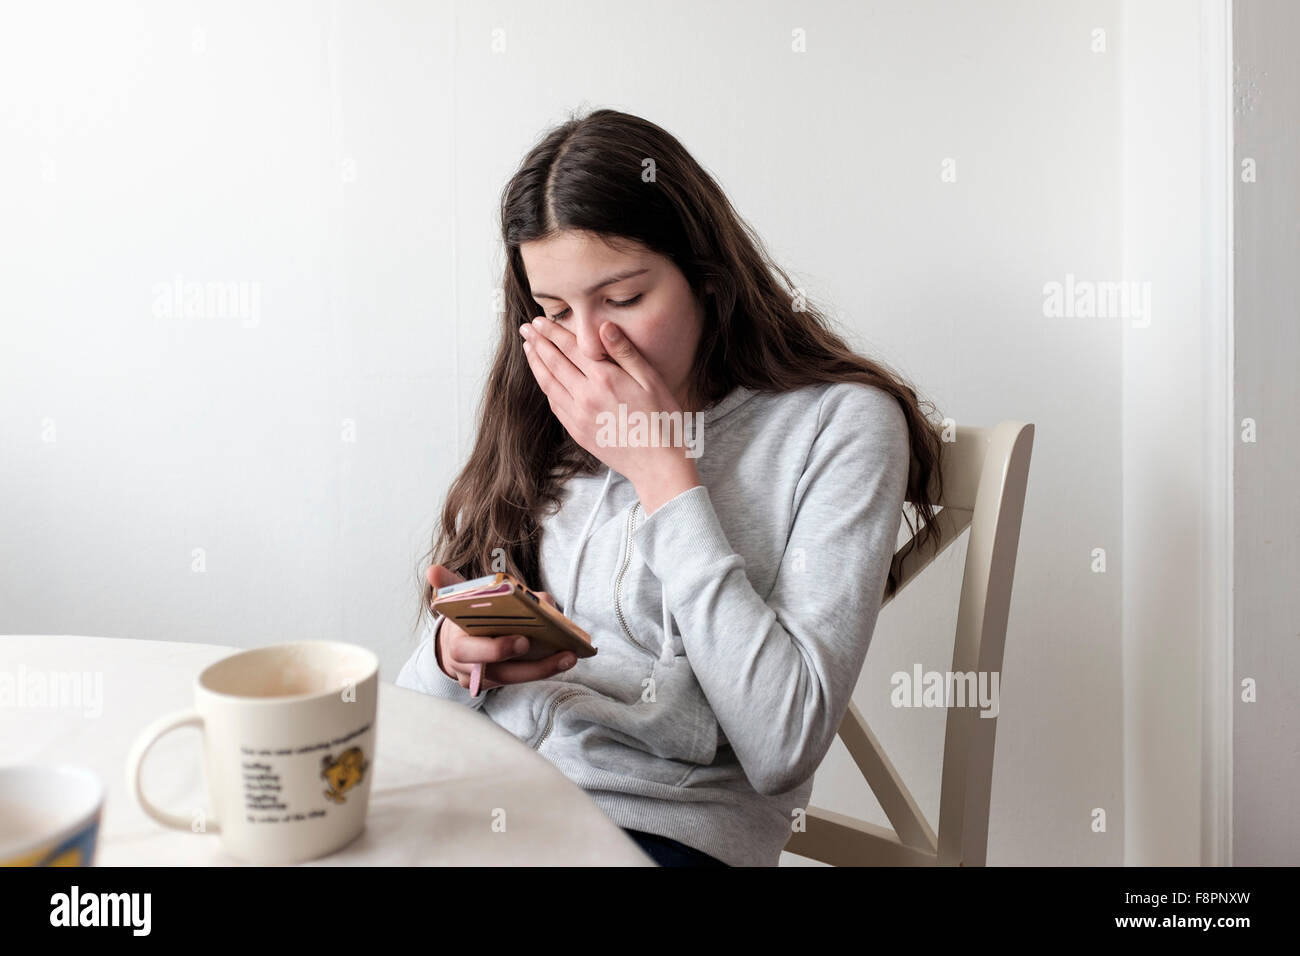 Teenage girl reading  on mobile phone,looking embarrassed Stock Photo